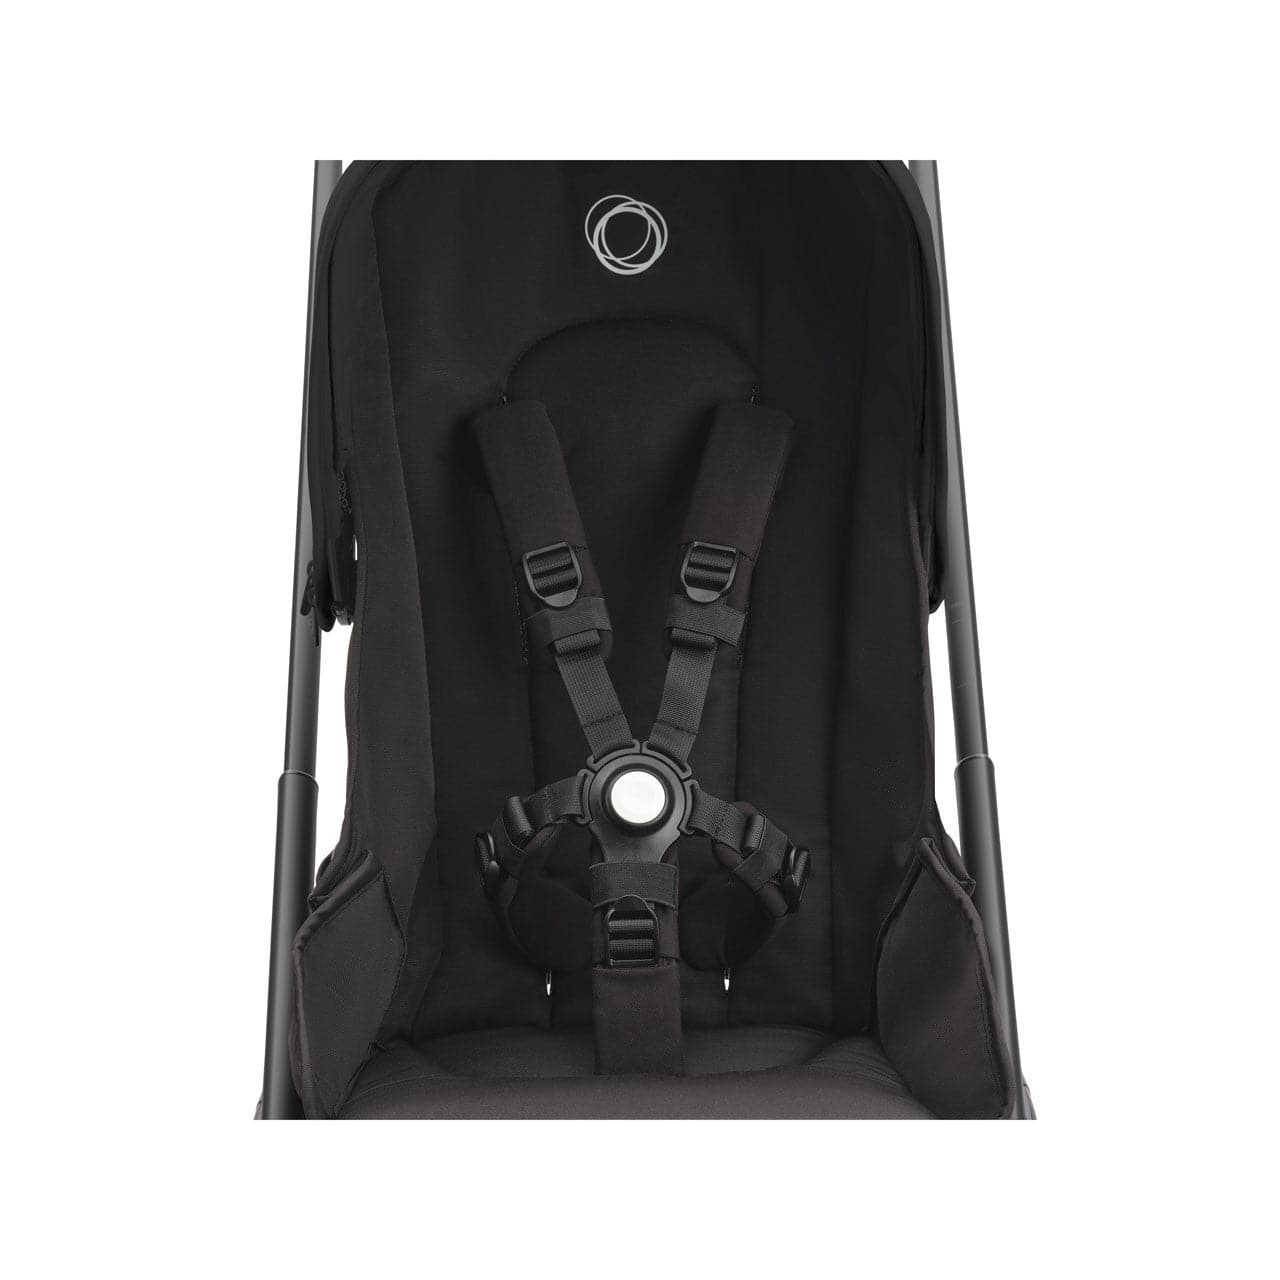 Bugaboo Dragonfly Essential Travel System Bundle - Midnight Black -  | For Your Little One